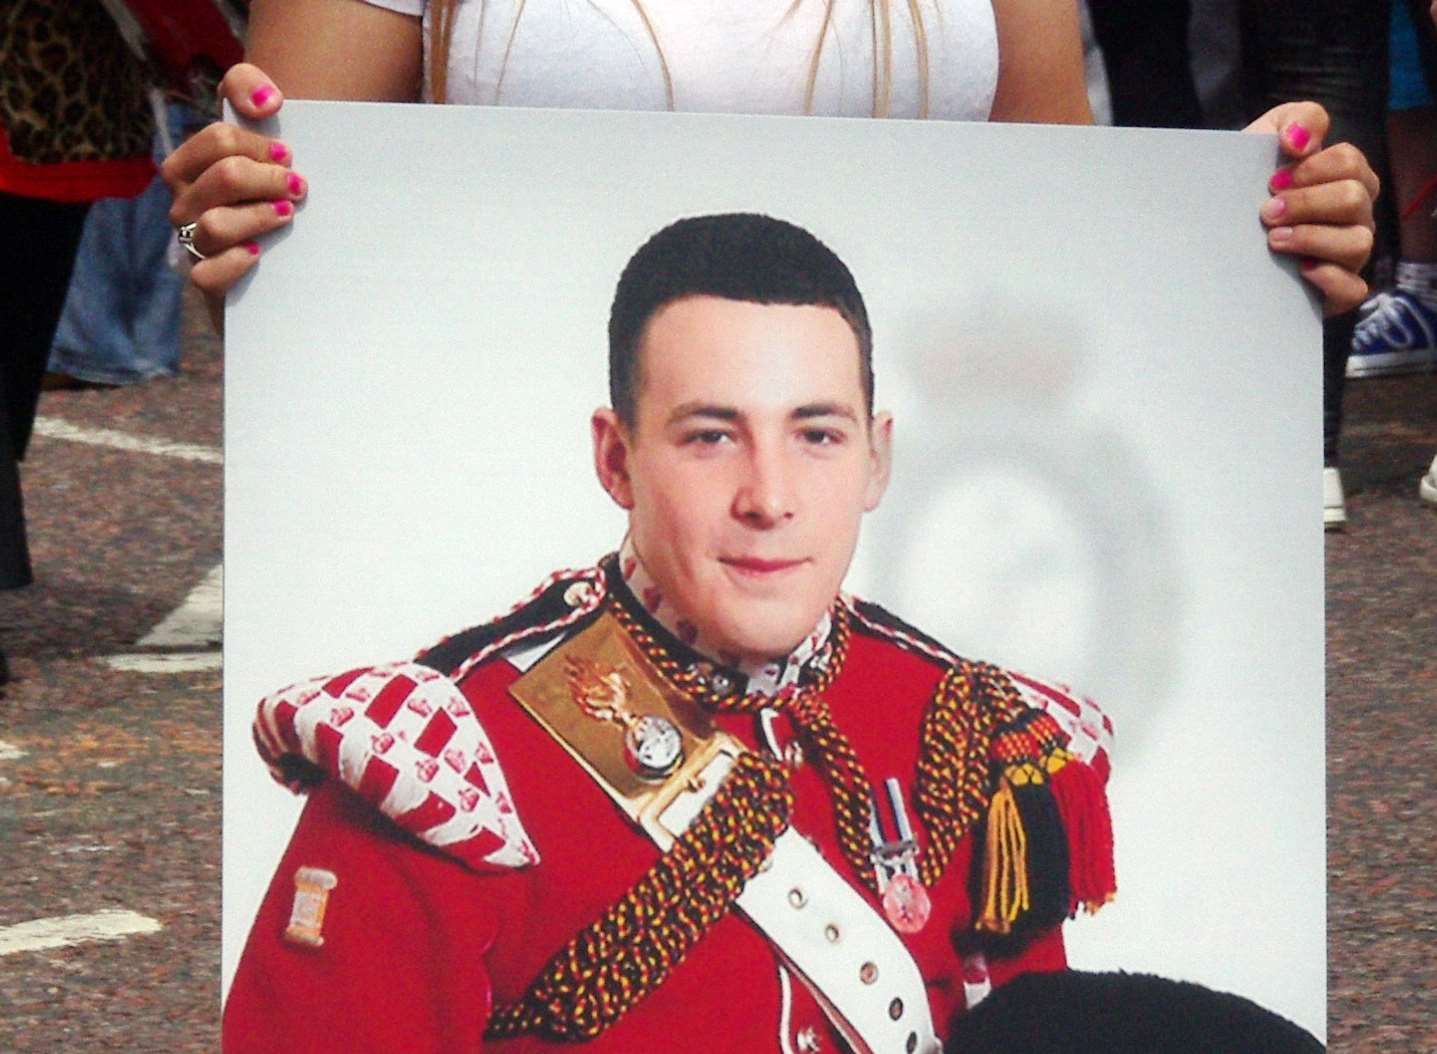 A photo of Lee Rigby was removed from the MOD website following a copyright dispute